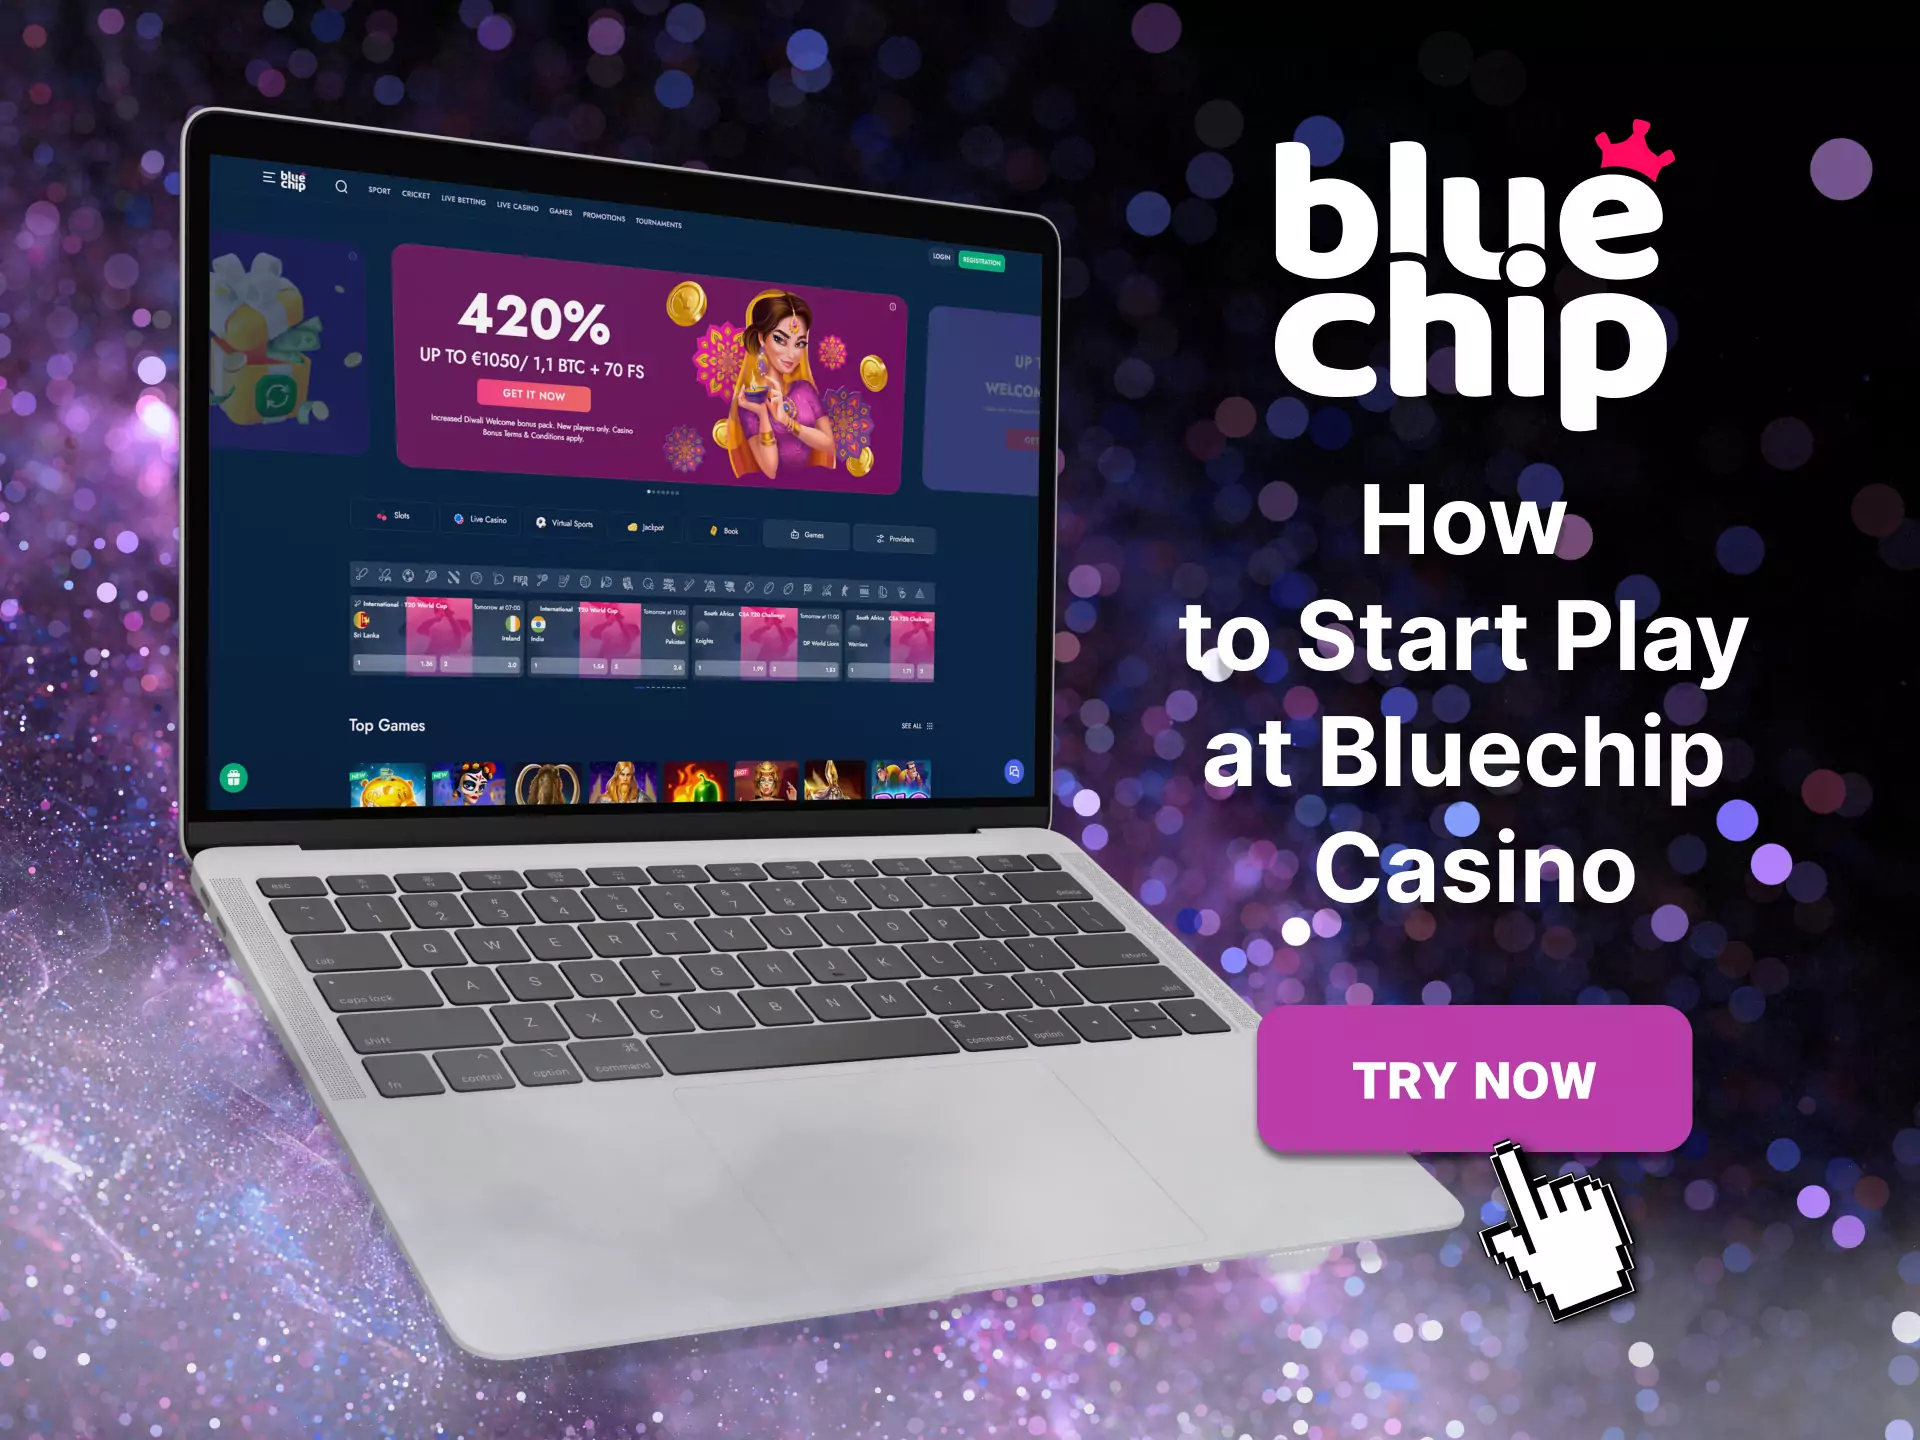 Read these instructions to start playing at Bluechip Casino.